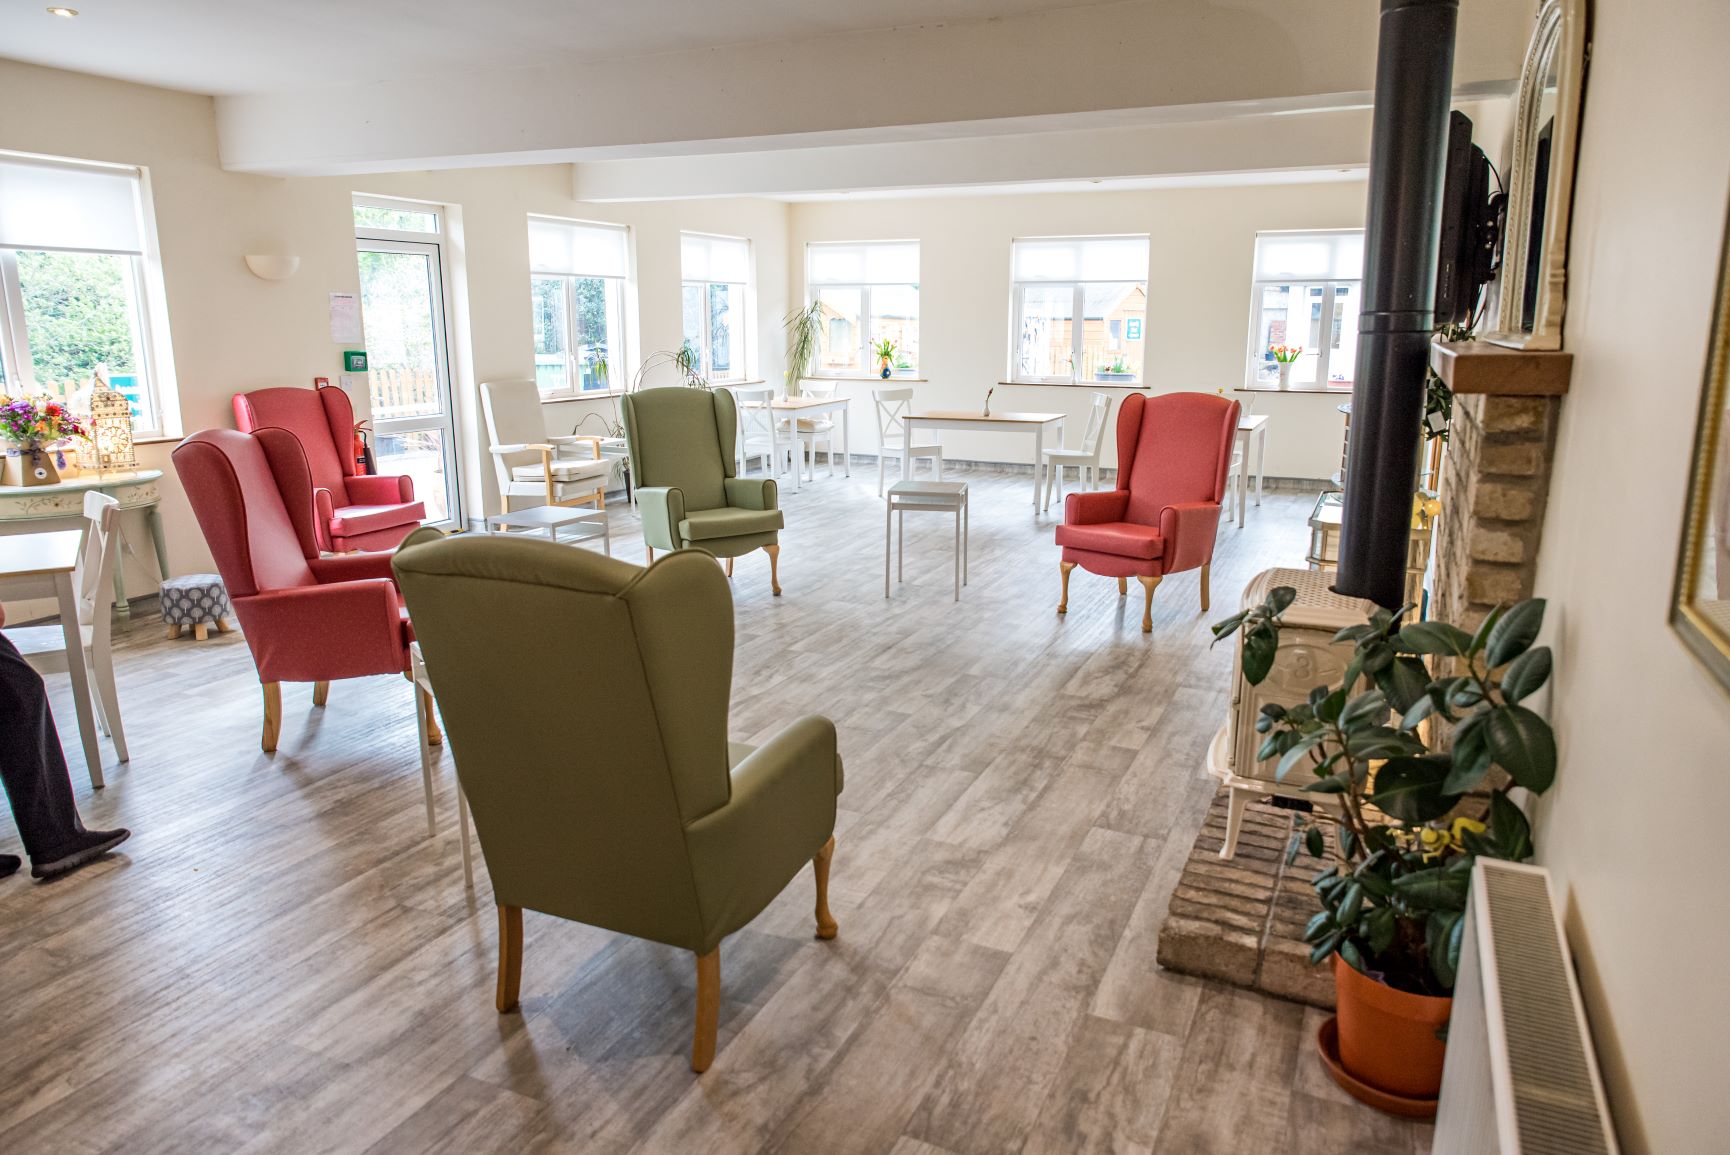 The main recreational and social area within the lodge.